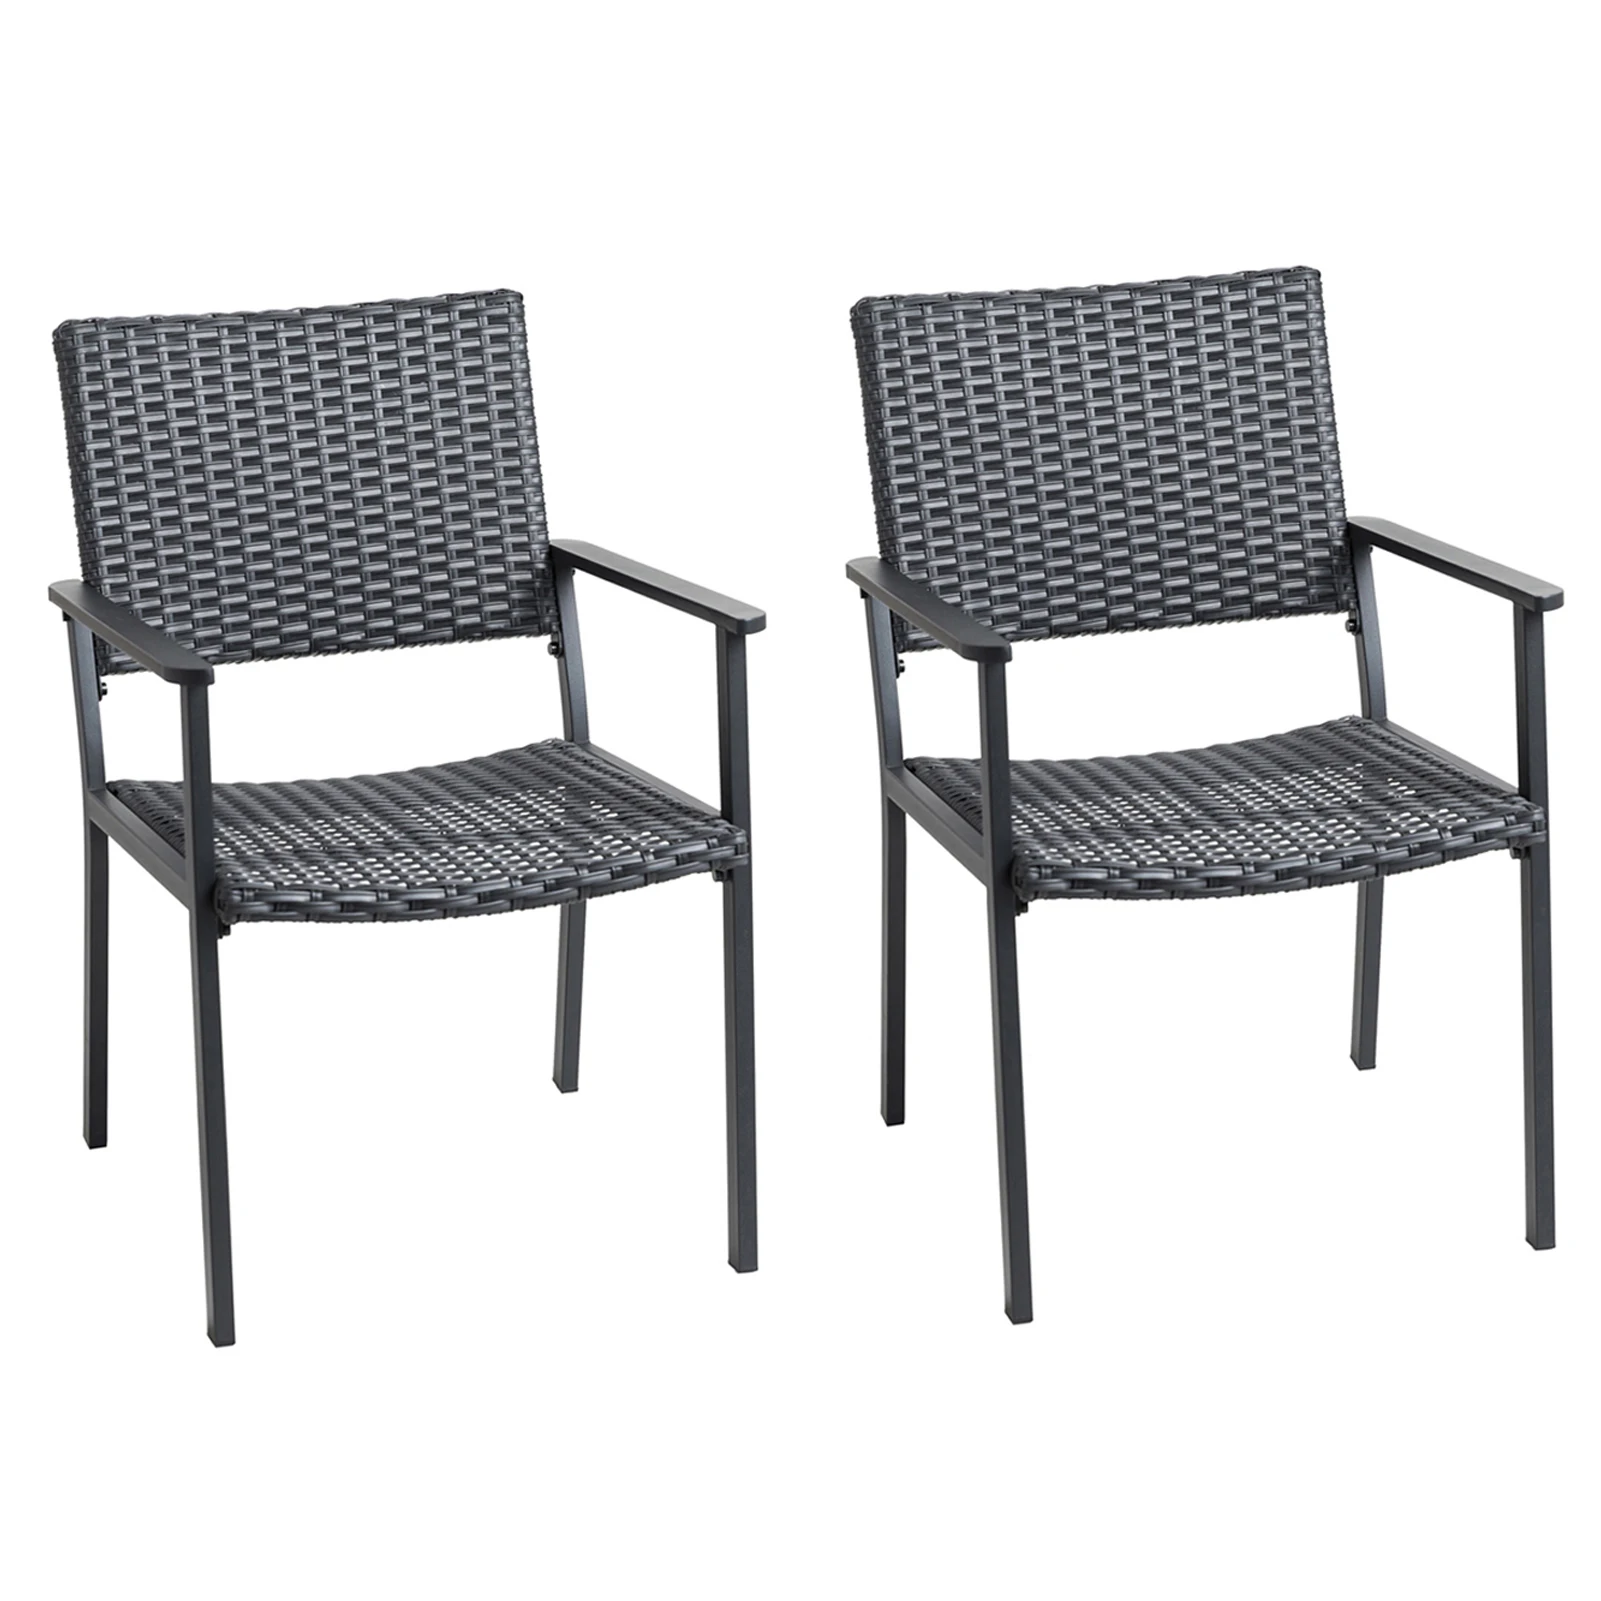 Set of 2 Outdoor  All Weather Wicker Dining Chairs for Outside Patio Tables, Metal Frame